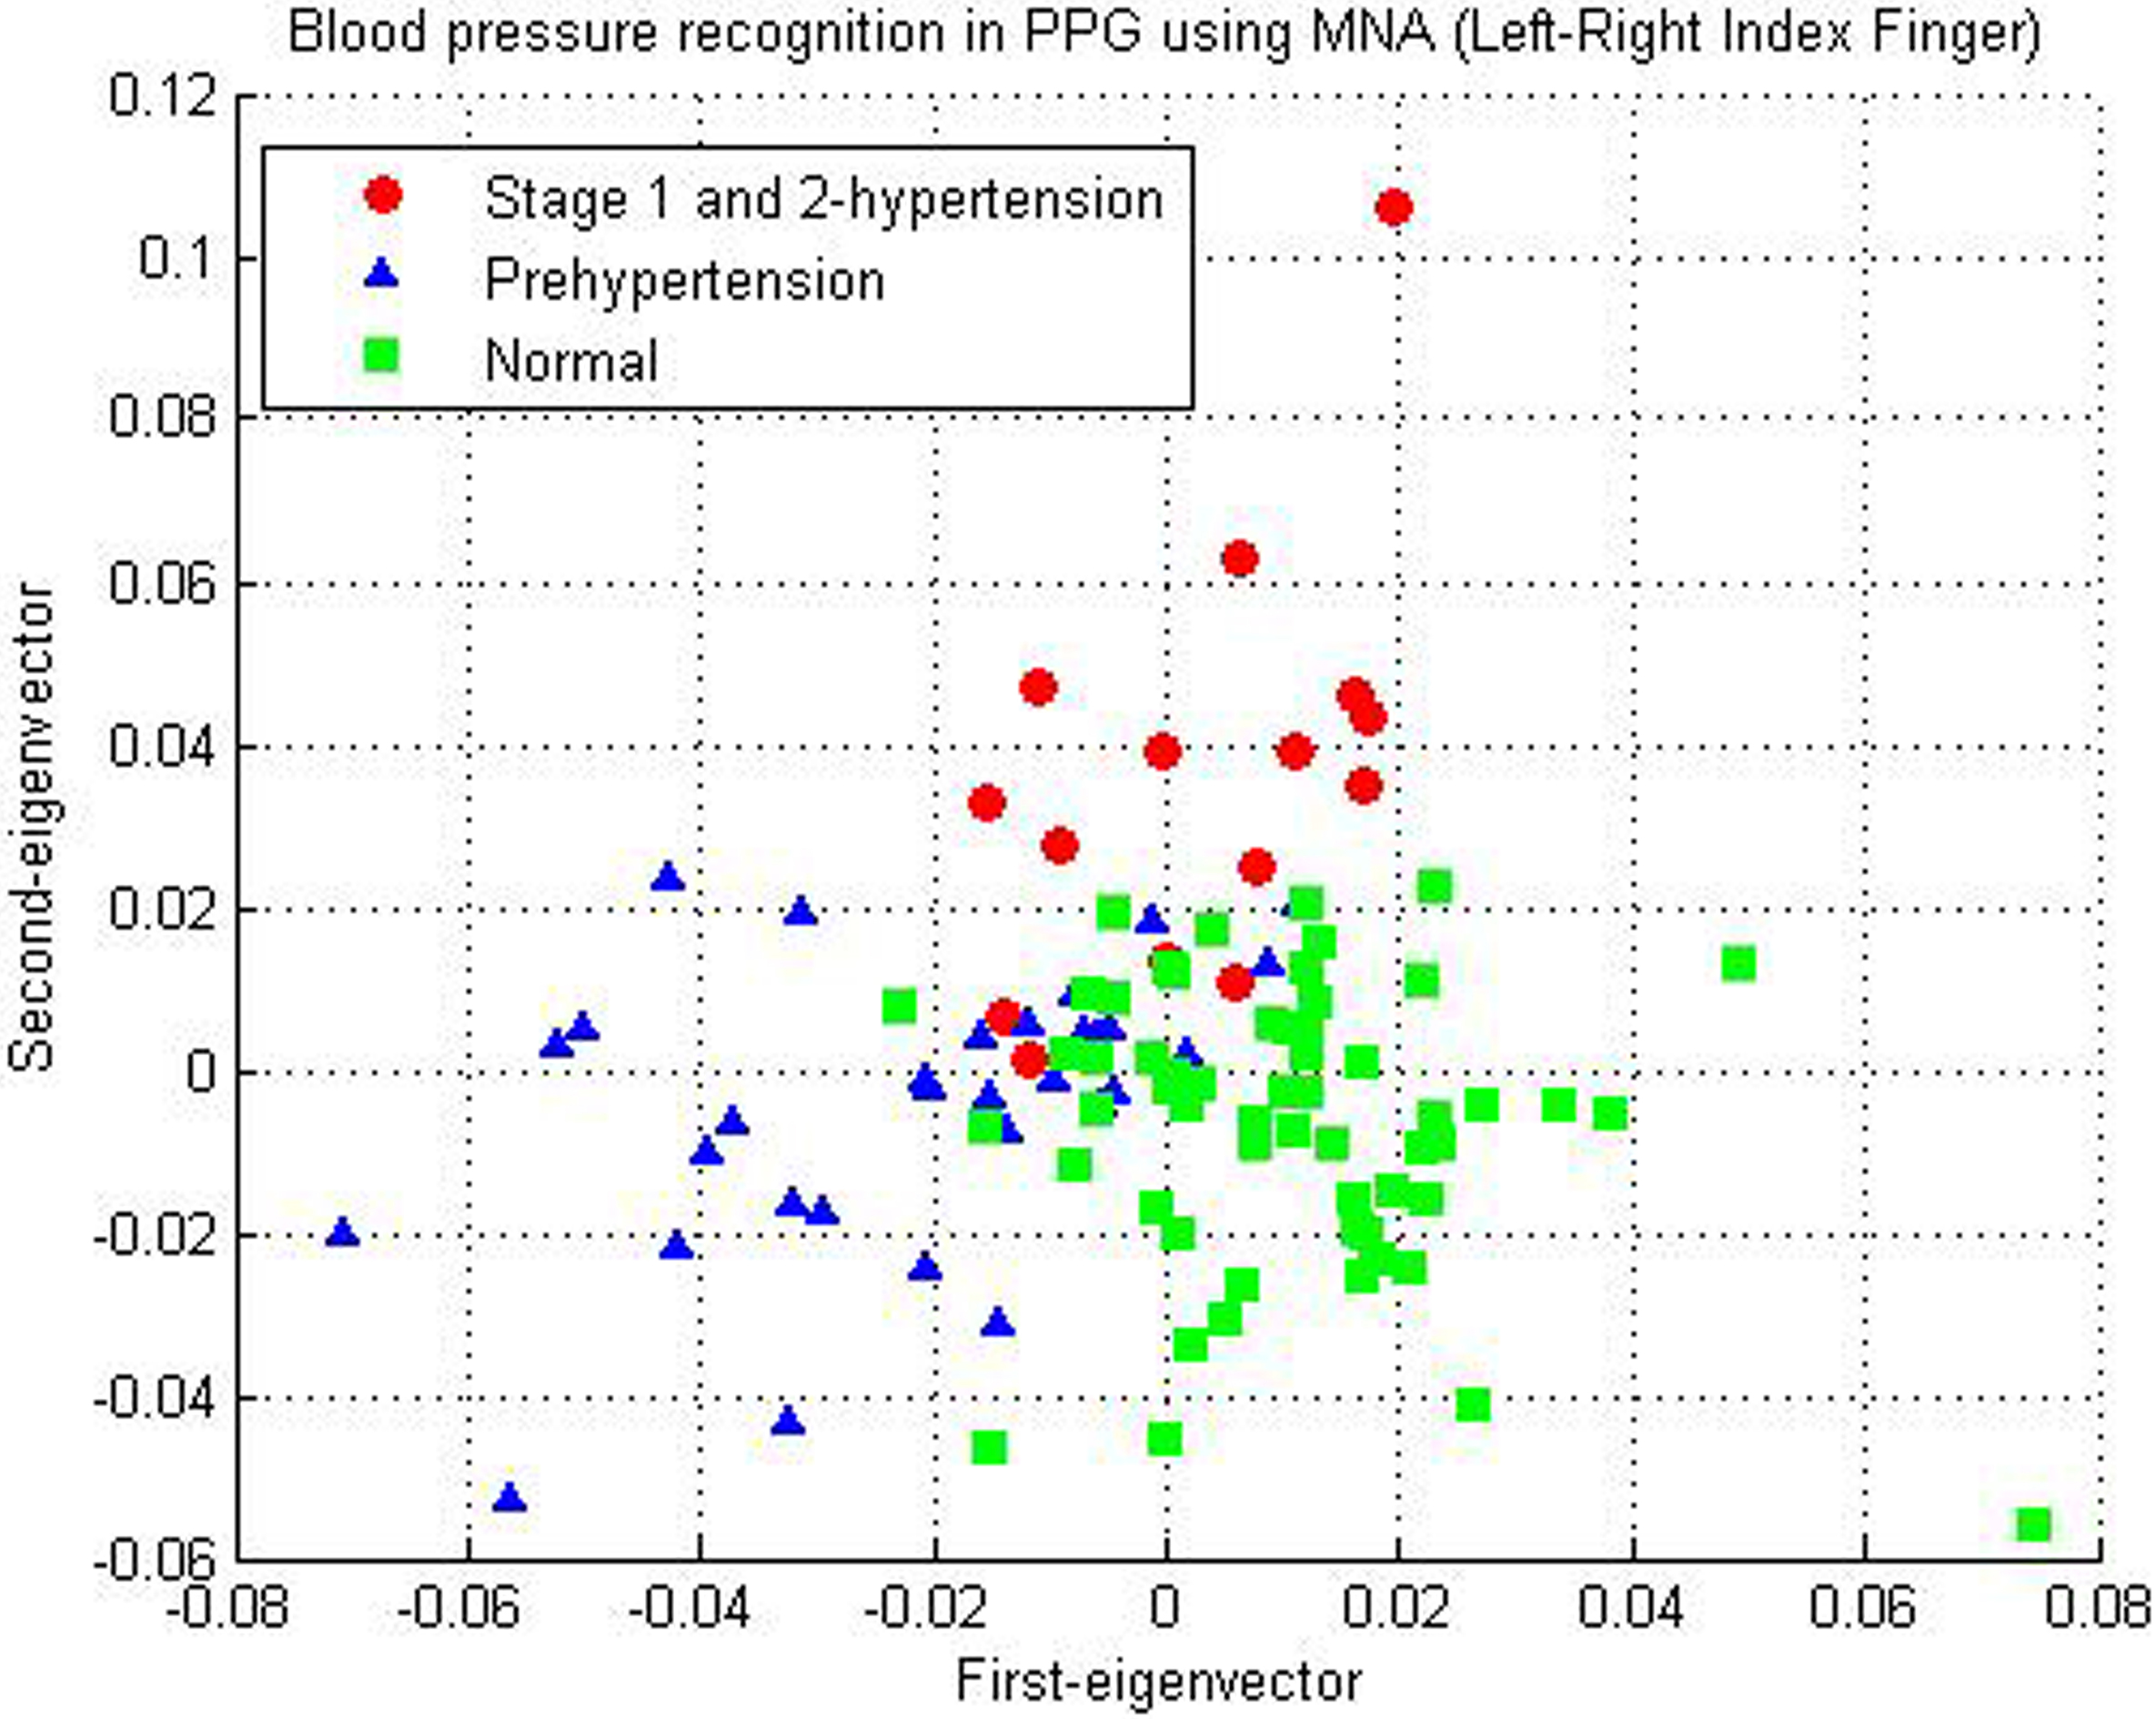 Result of classifying BP into three categories (normotensive, prehypertensive, and hypertensive) using PPG.